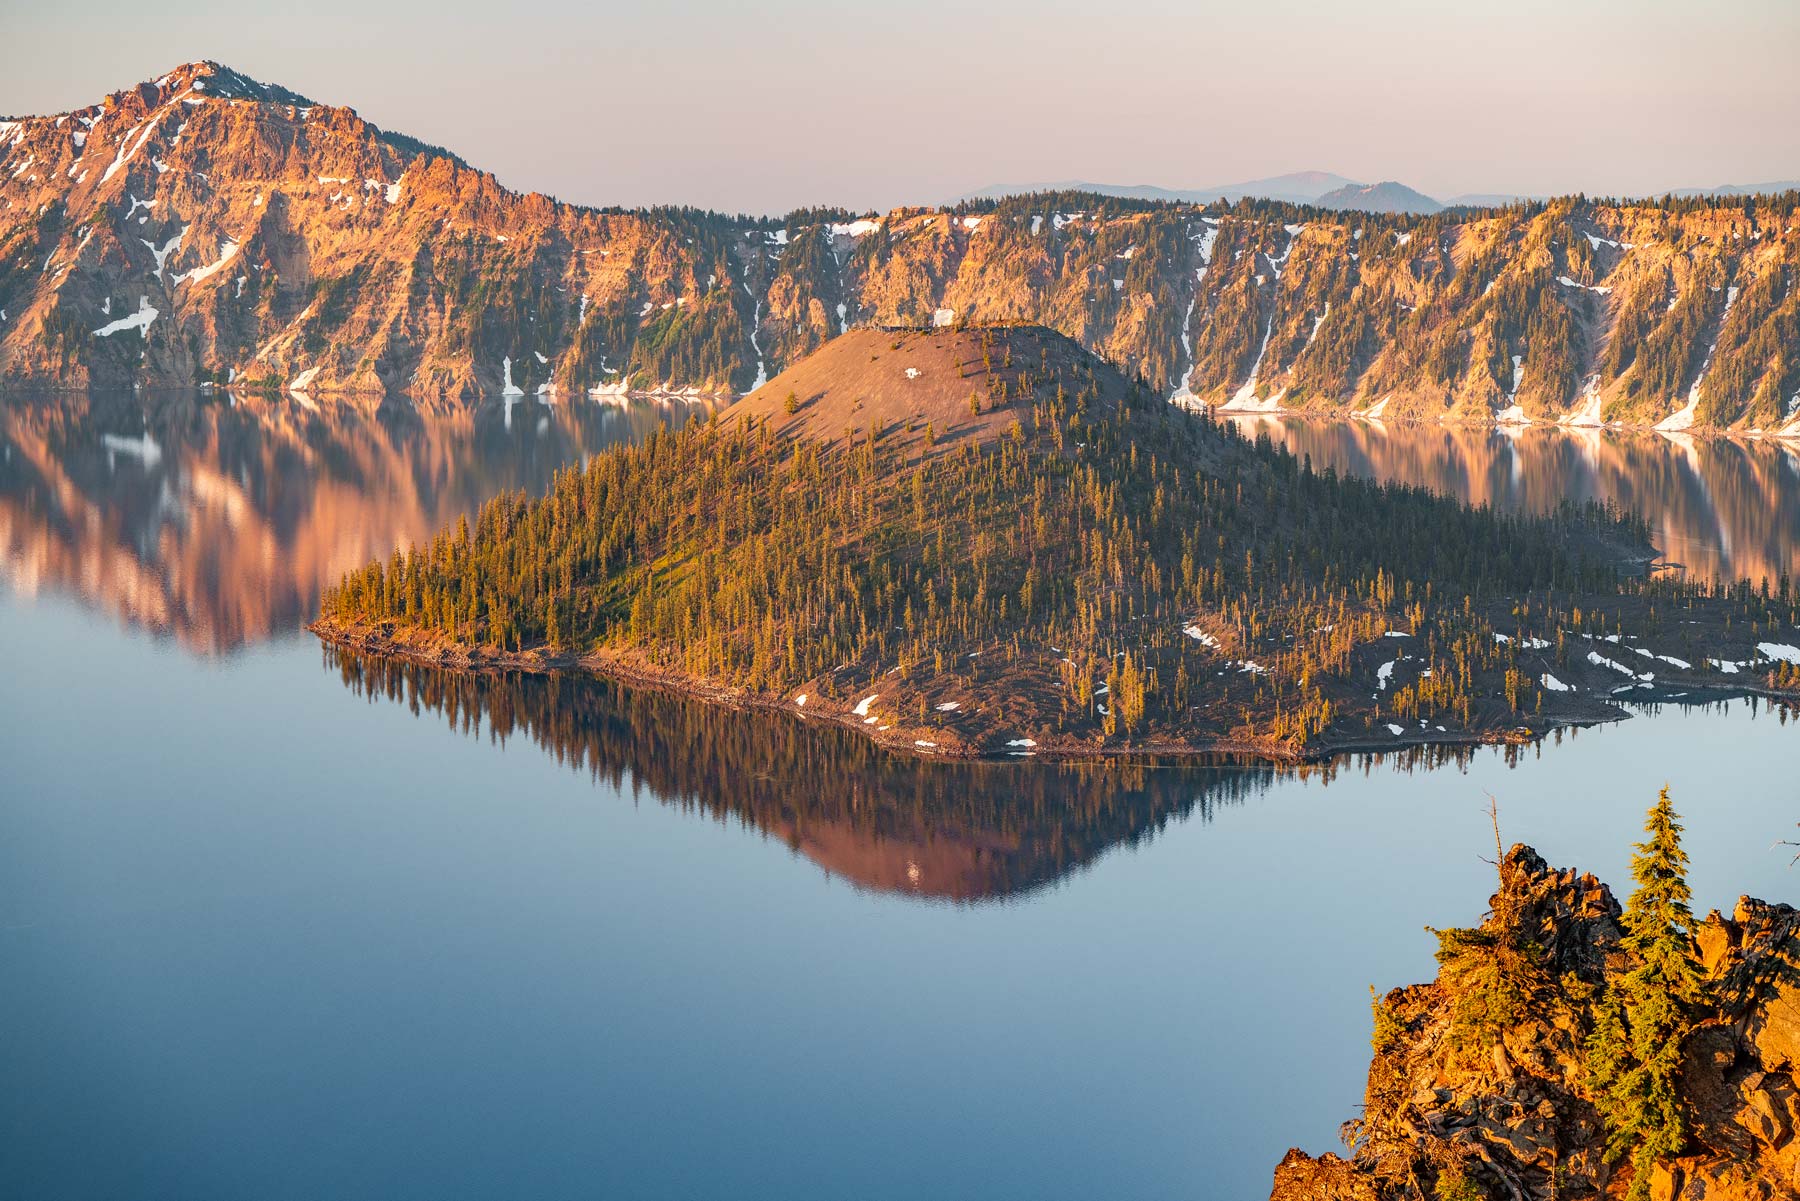 wizard island at sunrise, crater lake national park